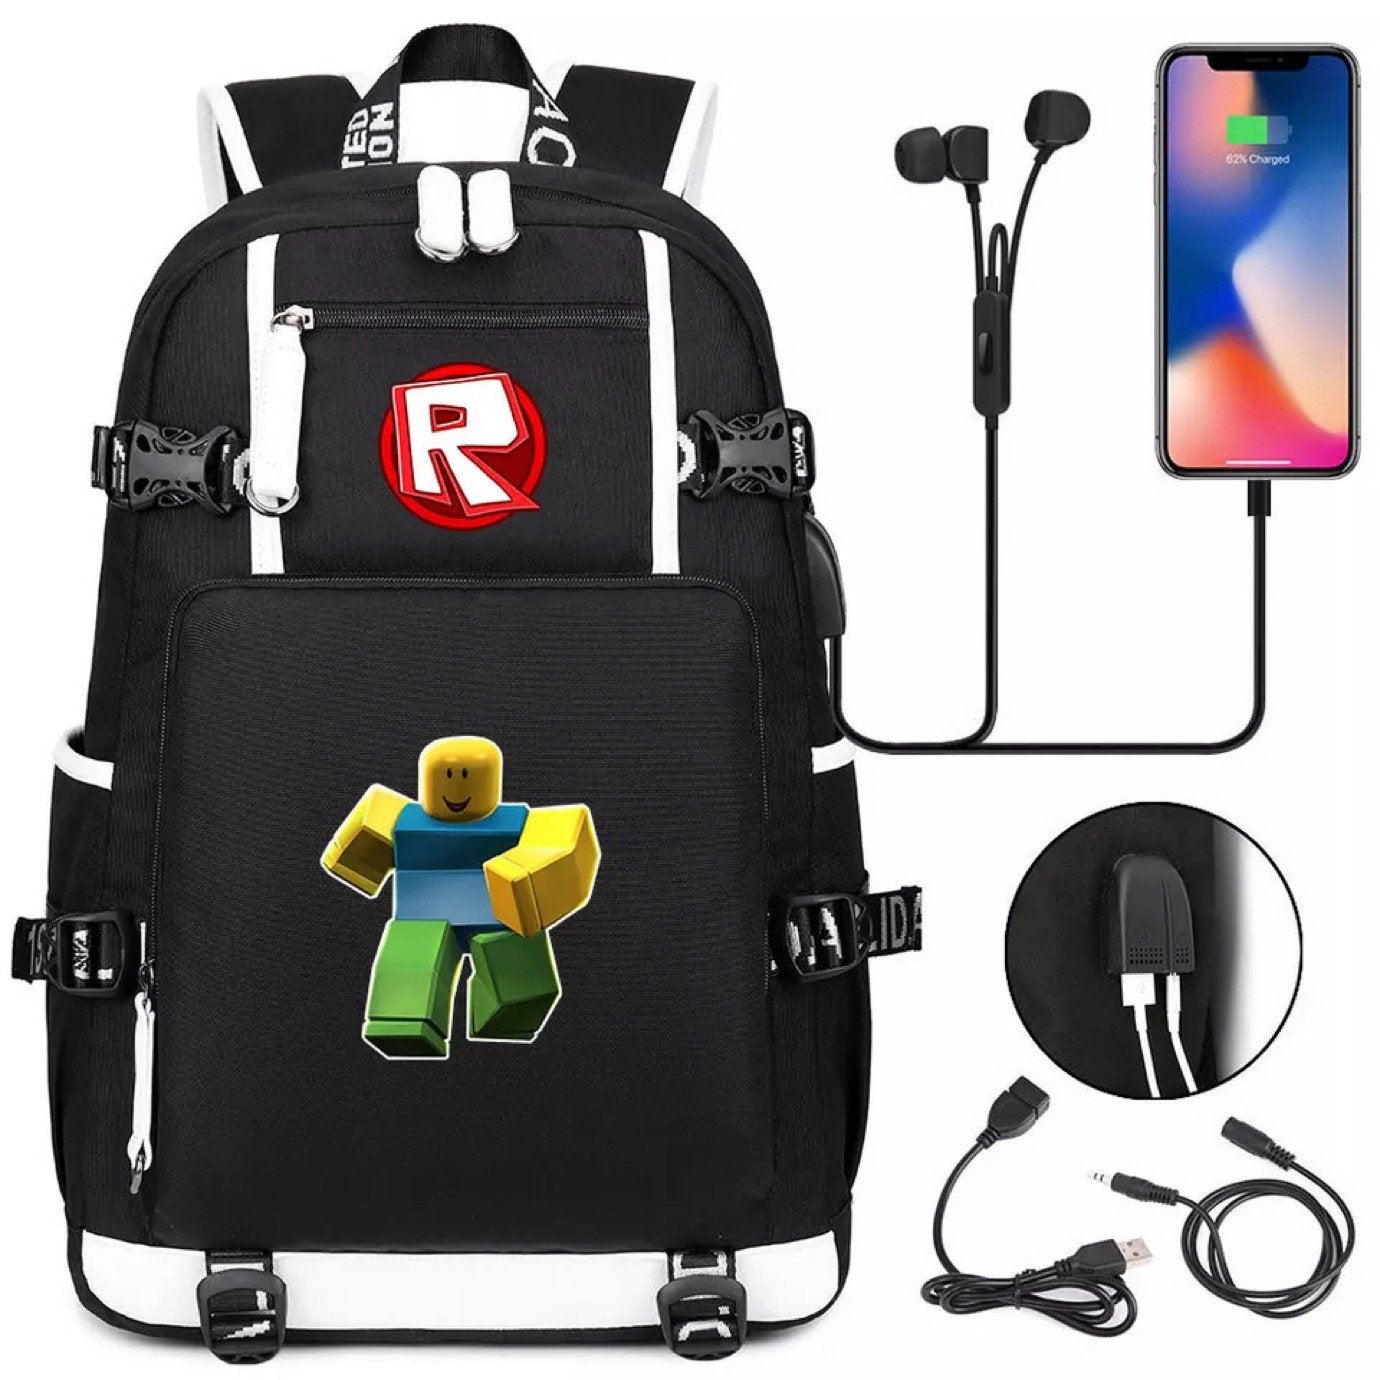 Roblox 2 Usb Charging Backpack School Note Book Laptop Travel Bags Bag Picky - alan walker backpack roblox